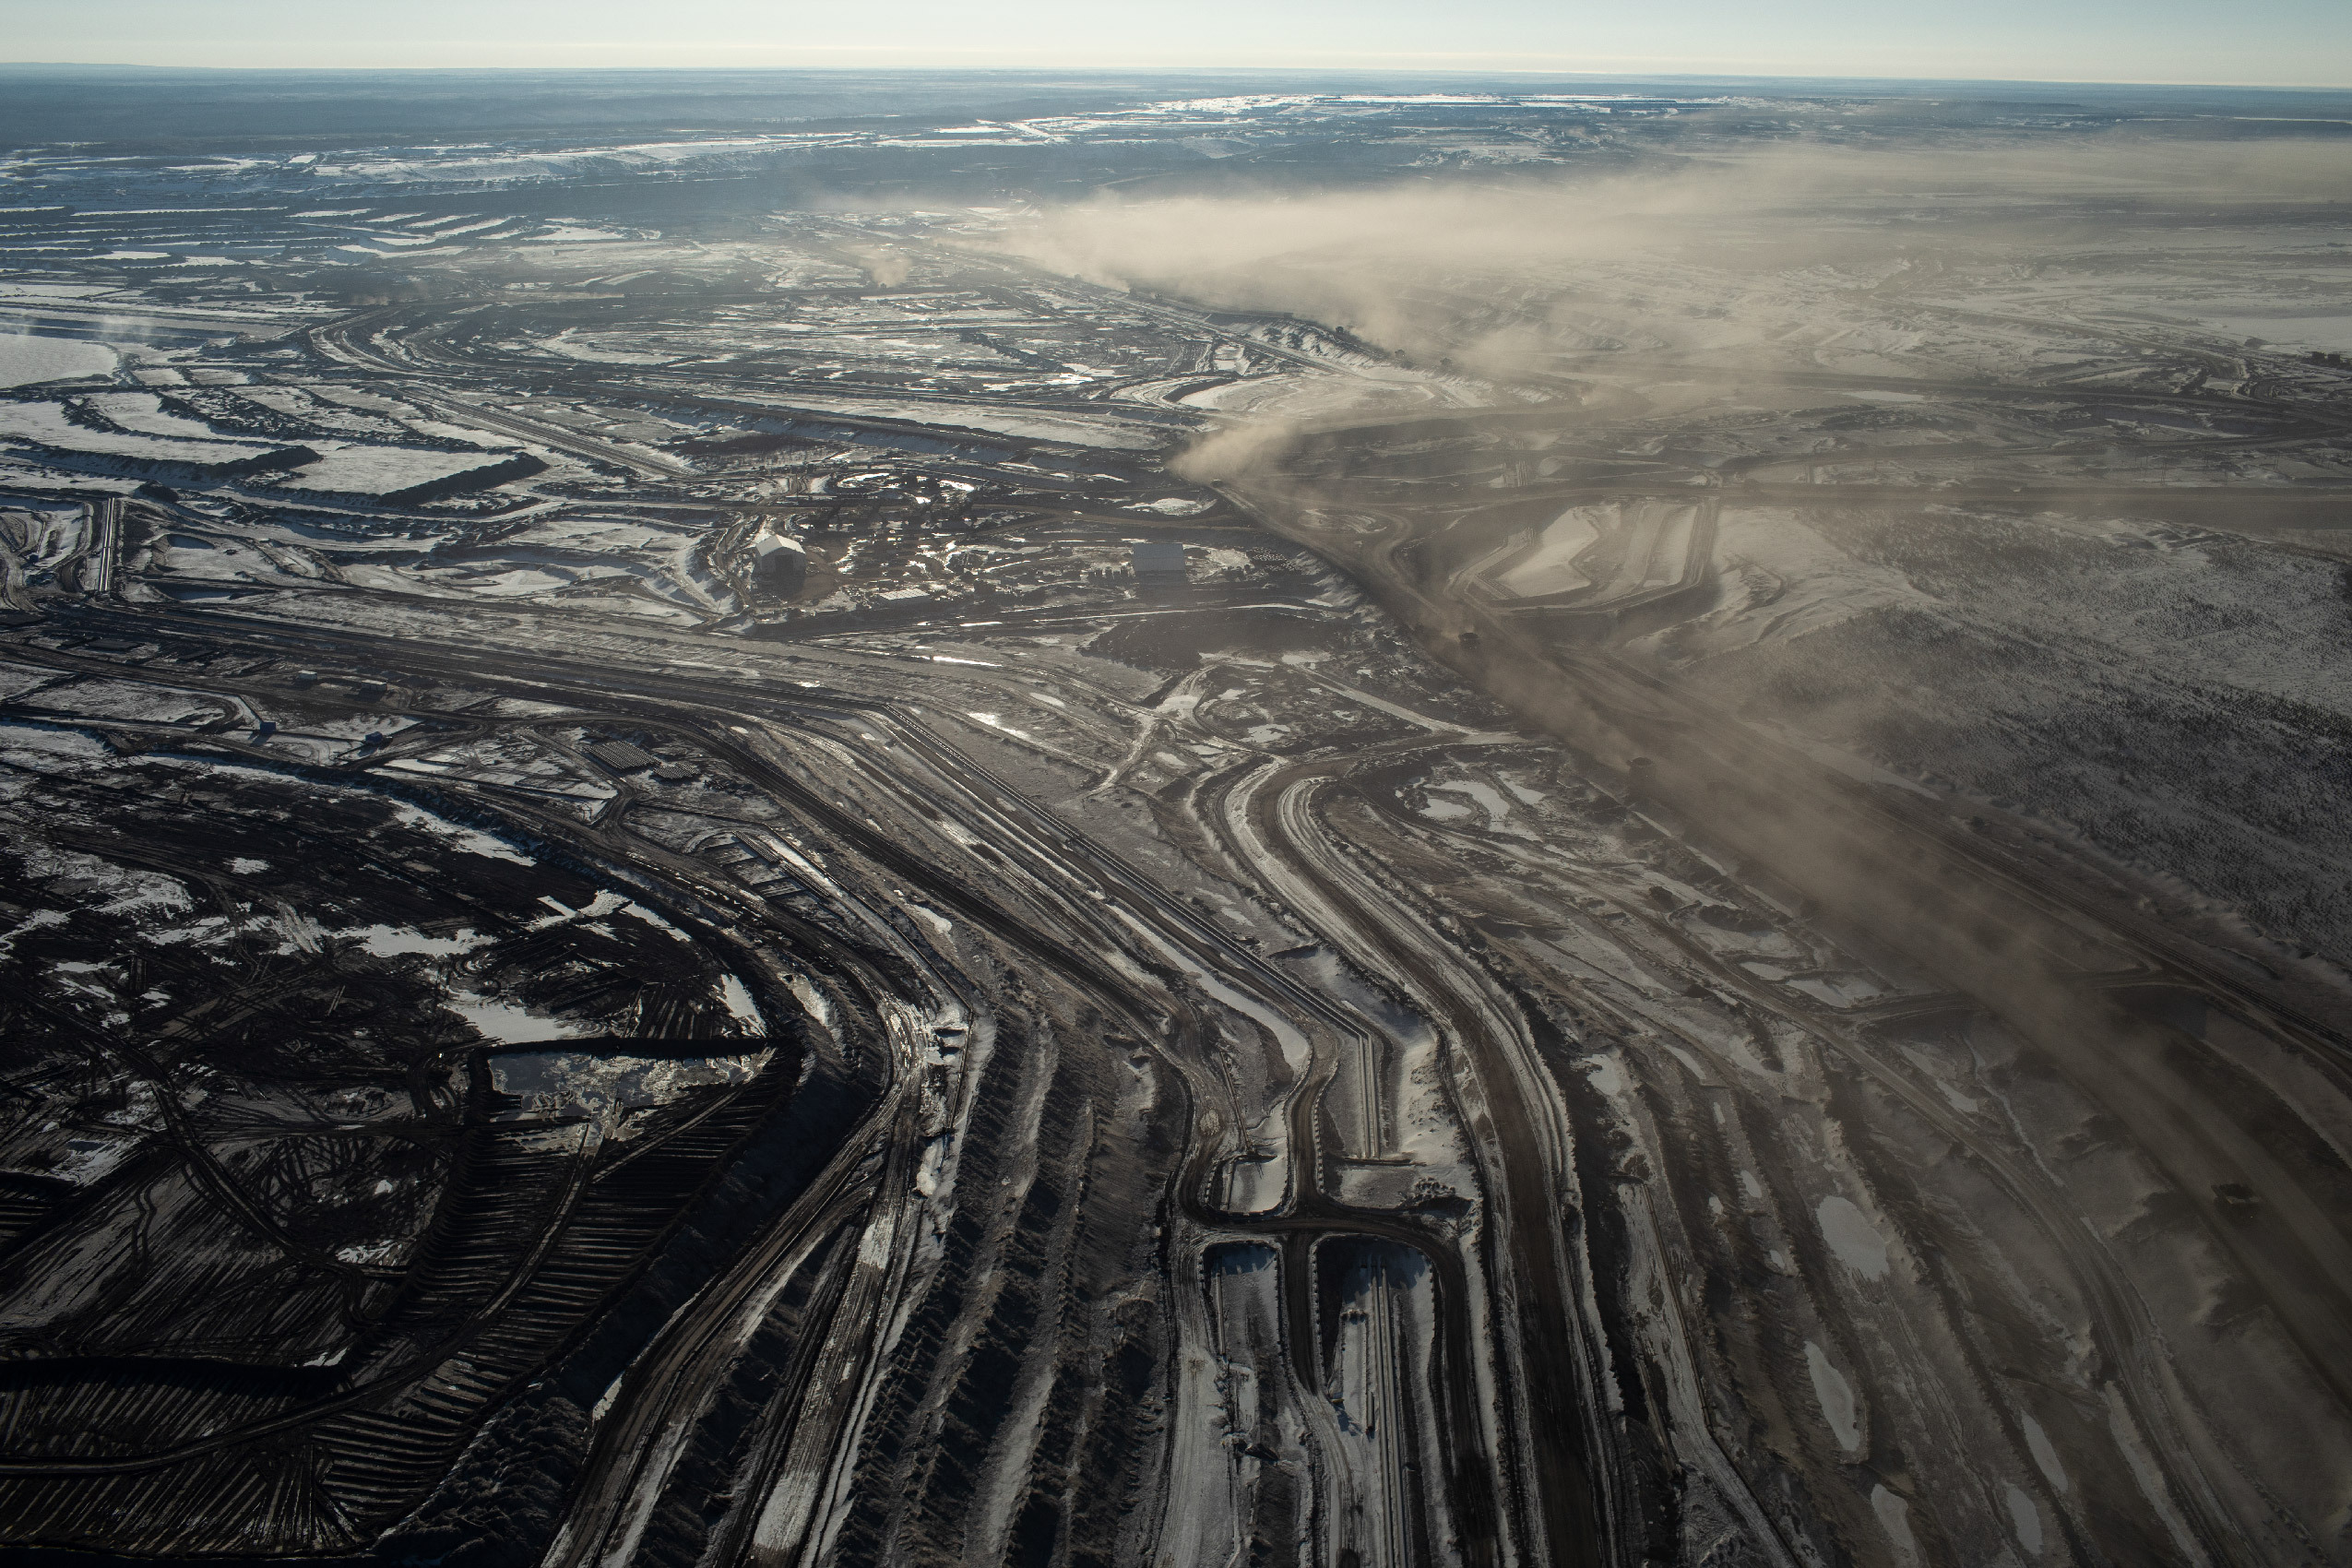 Dark muddy brown surface in the Alberta oilsands seen from the air cris-crossed with offroad tracks.